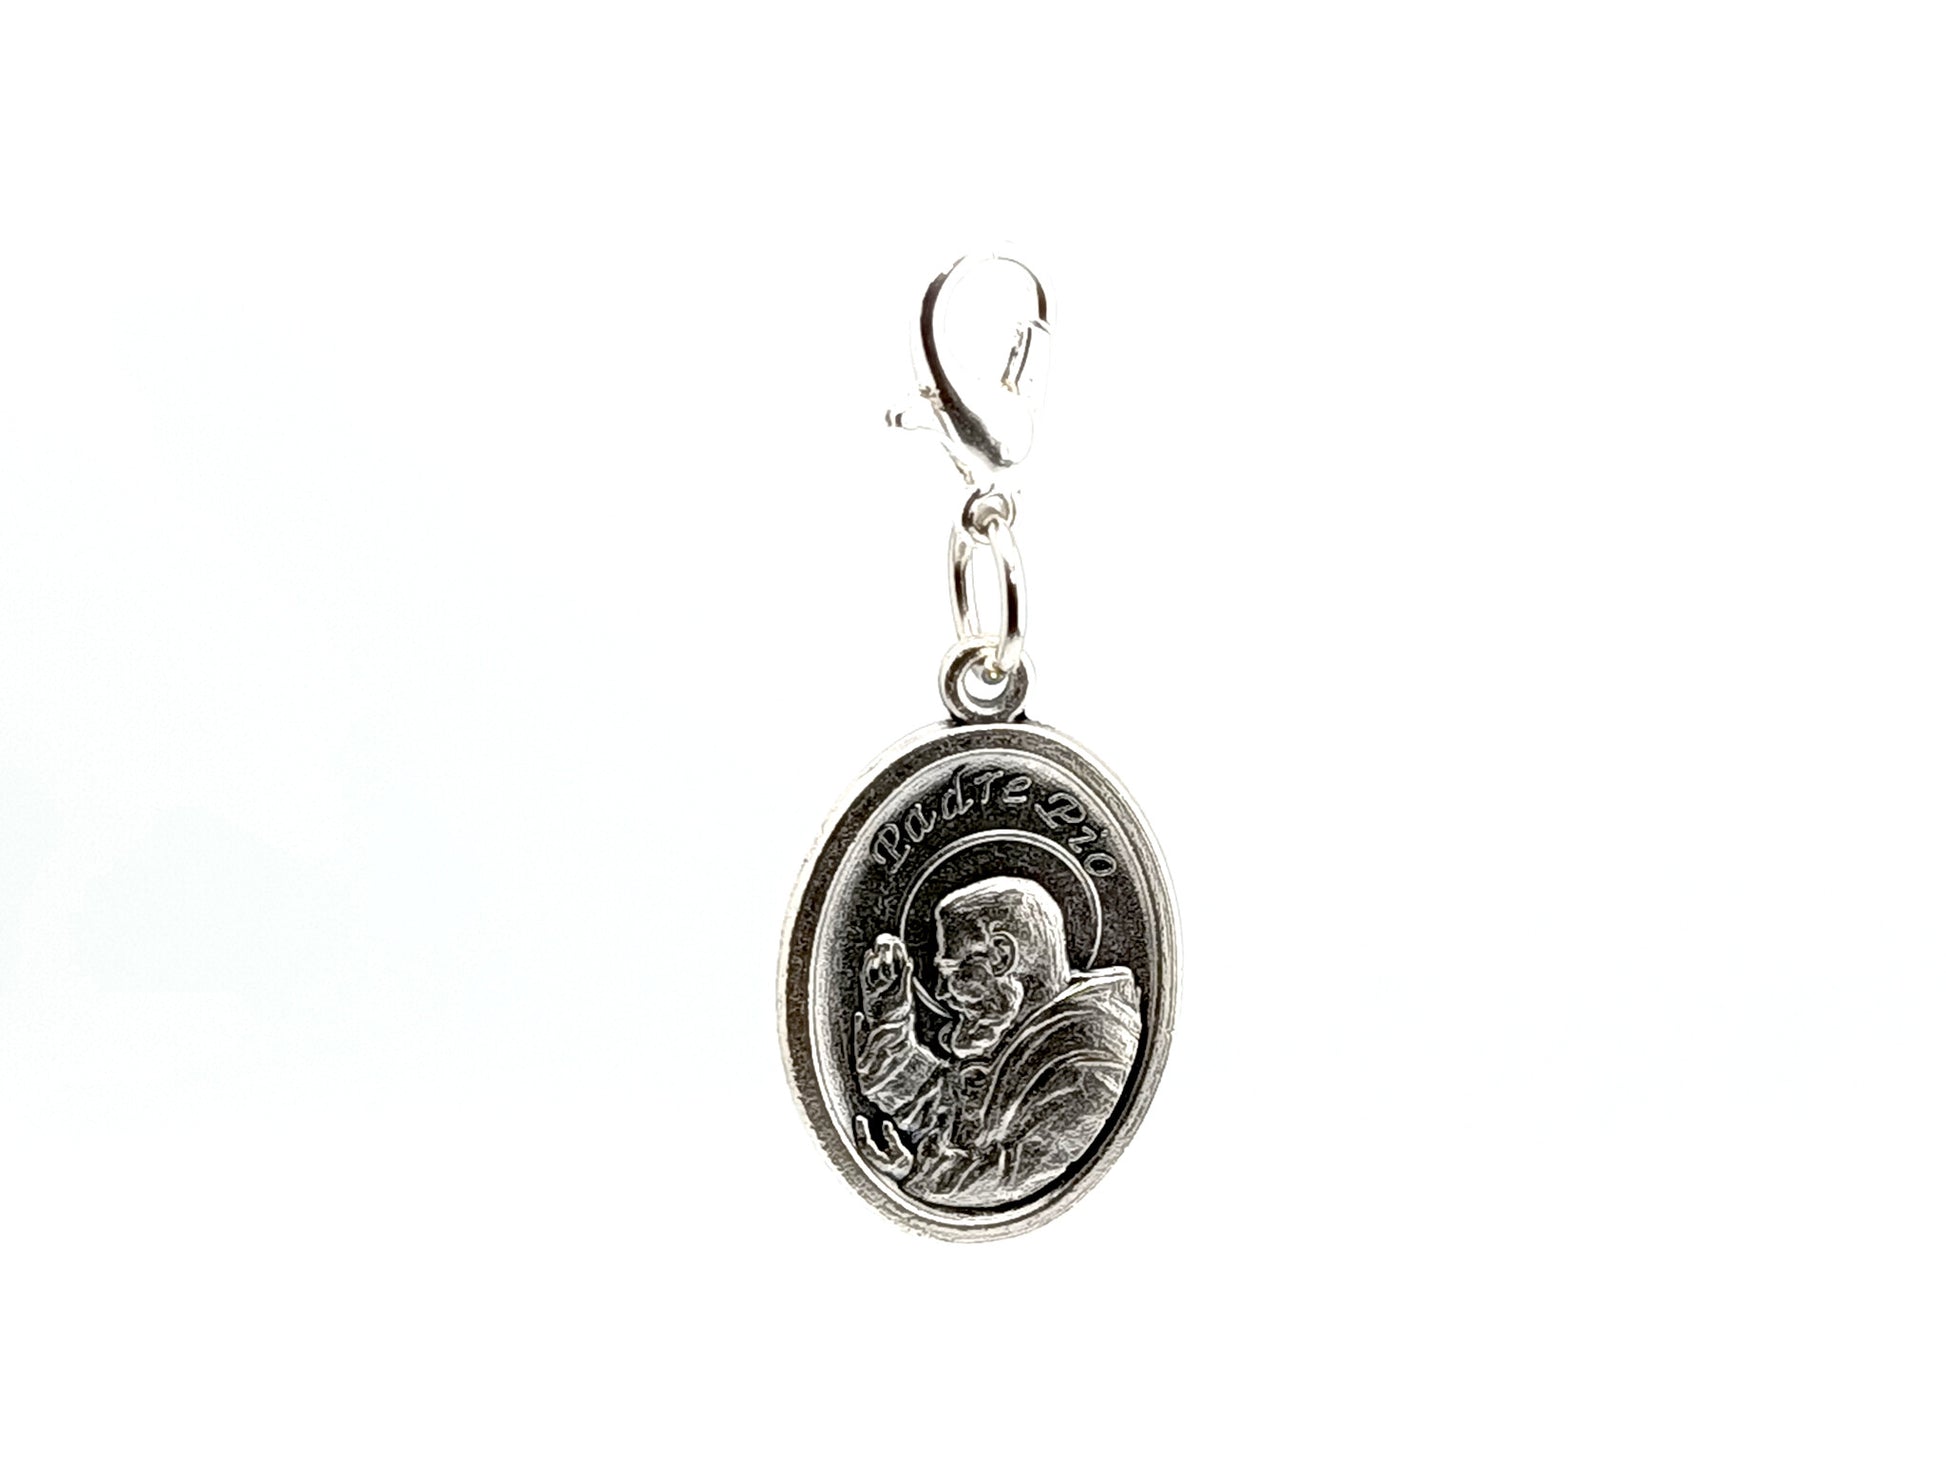 Saint Padre Pio unique rosary beads metal alloy relic touch medal.